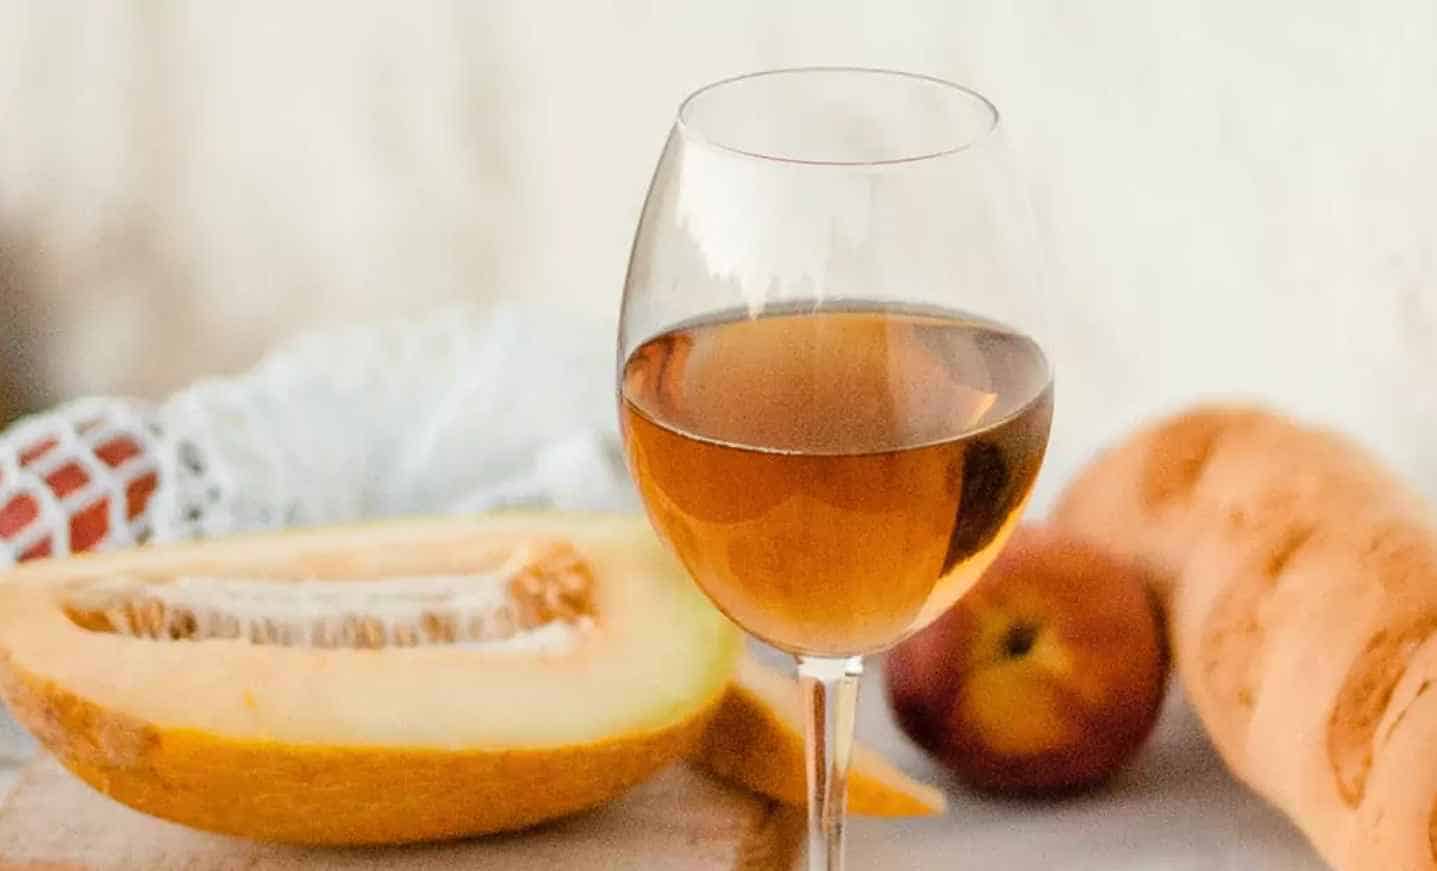 What are the health benefits of peach wine